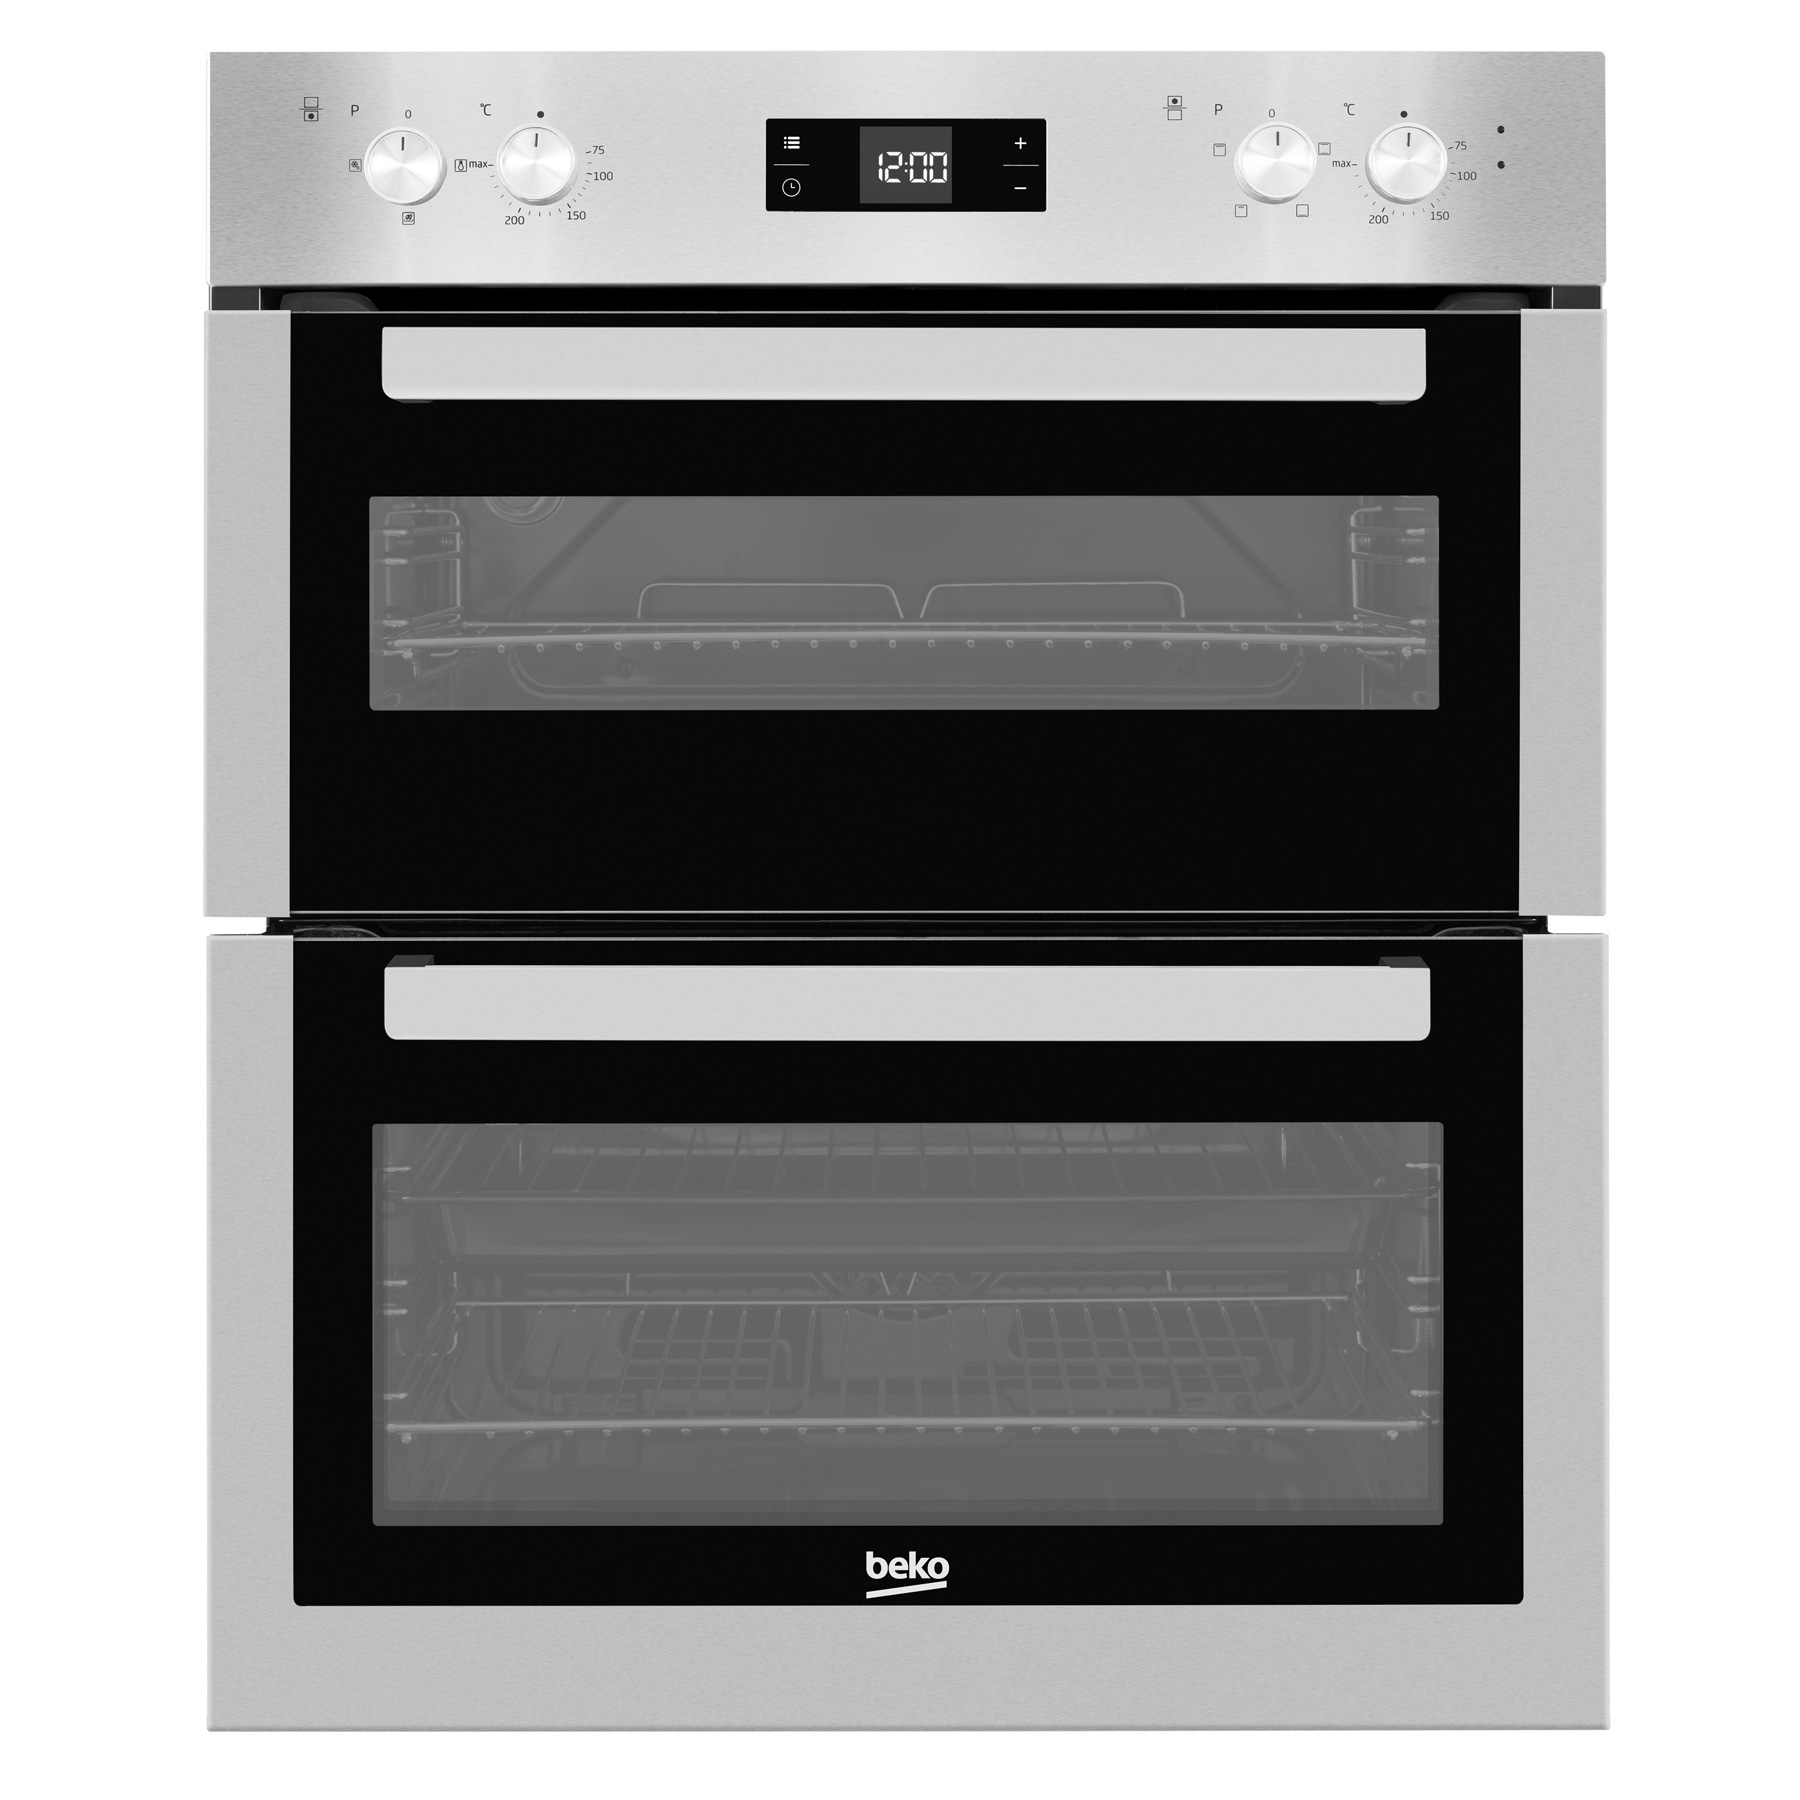 Image of Beko BTF26300X Built Under Electric Double Oven in St Steel A A Rated